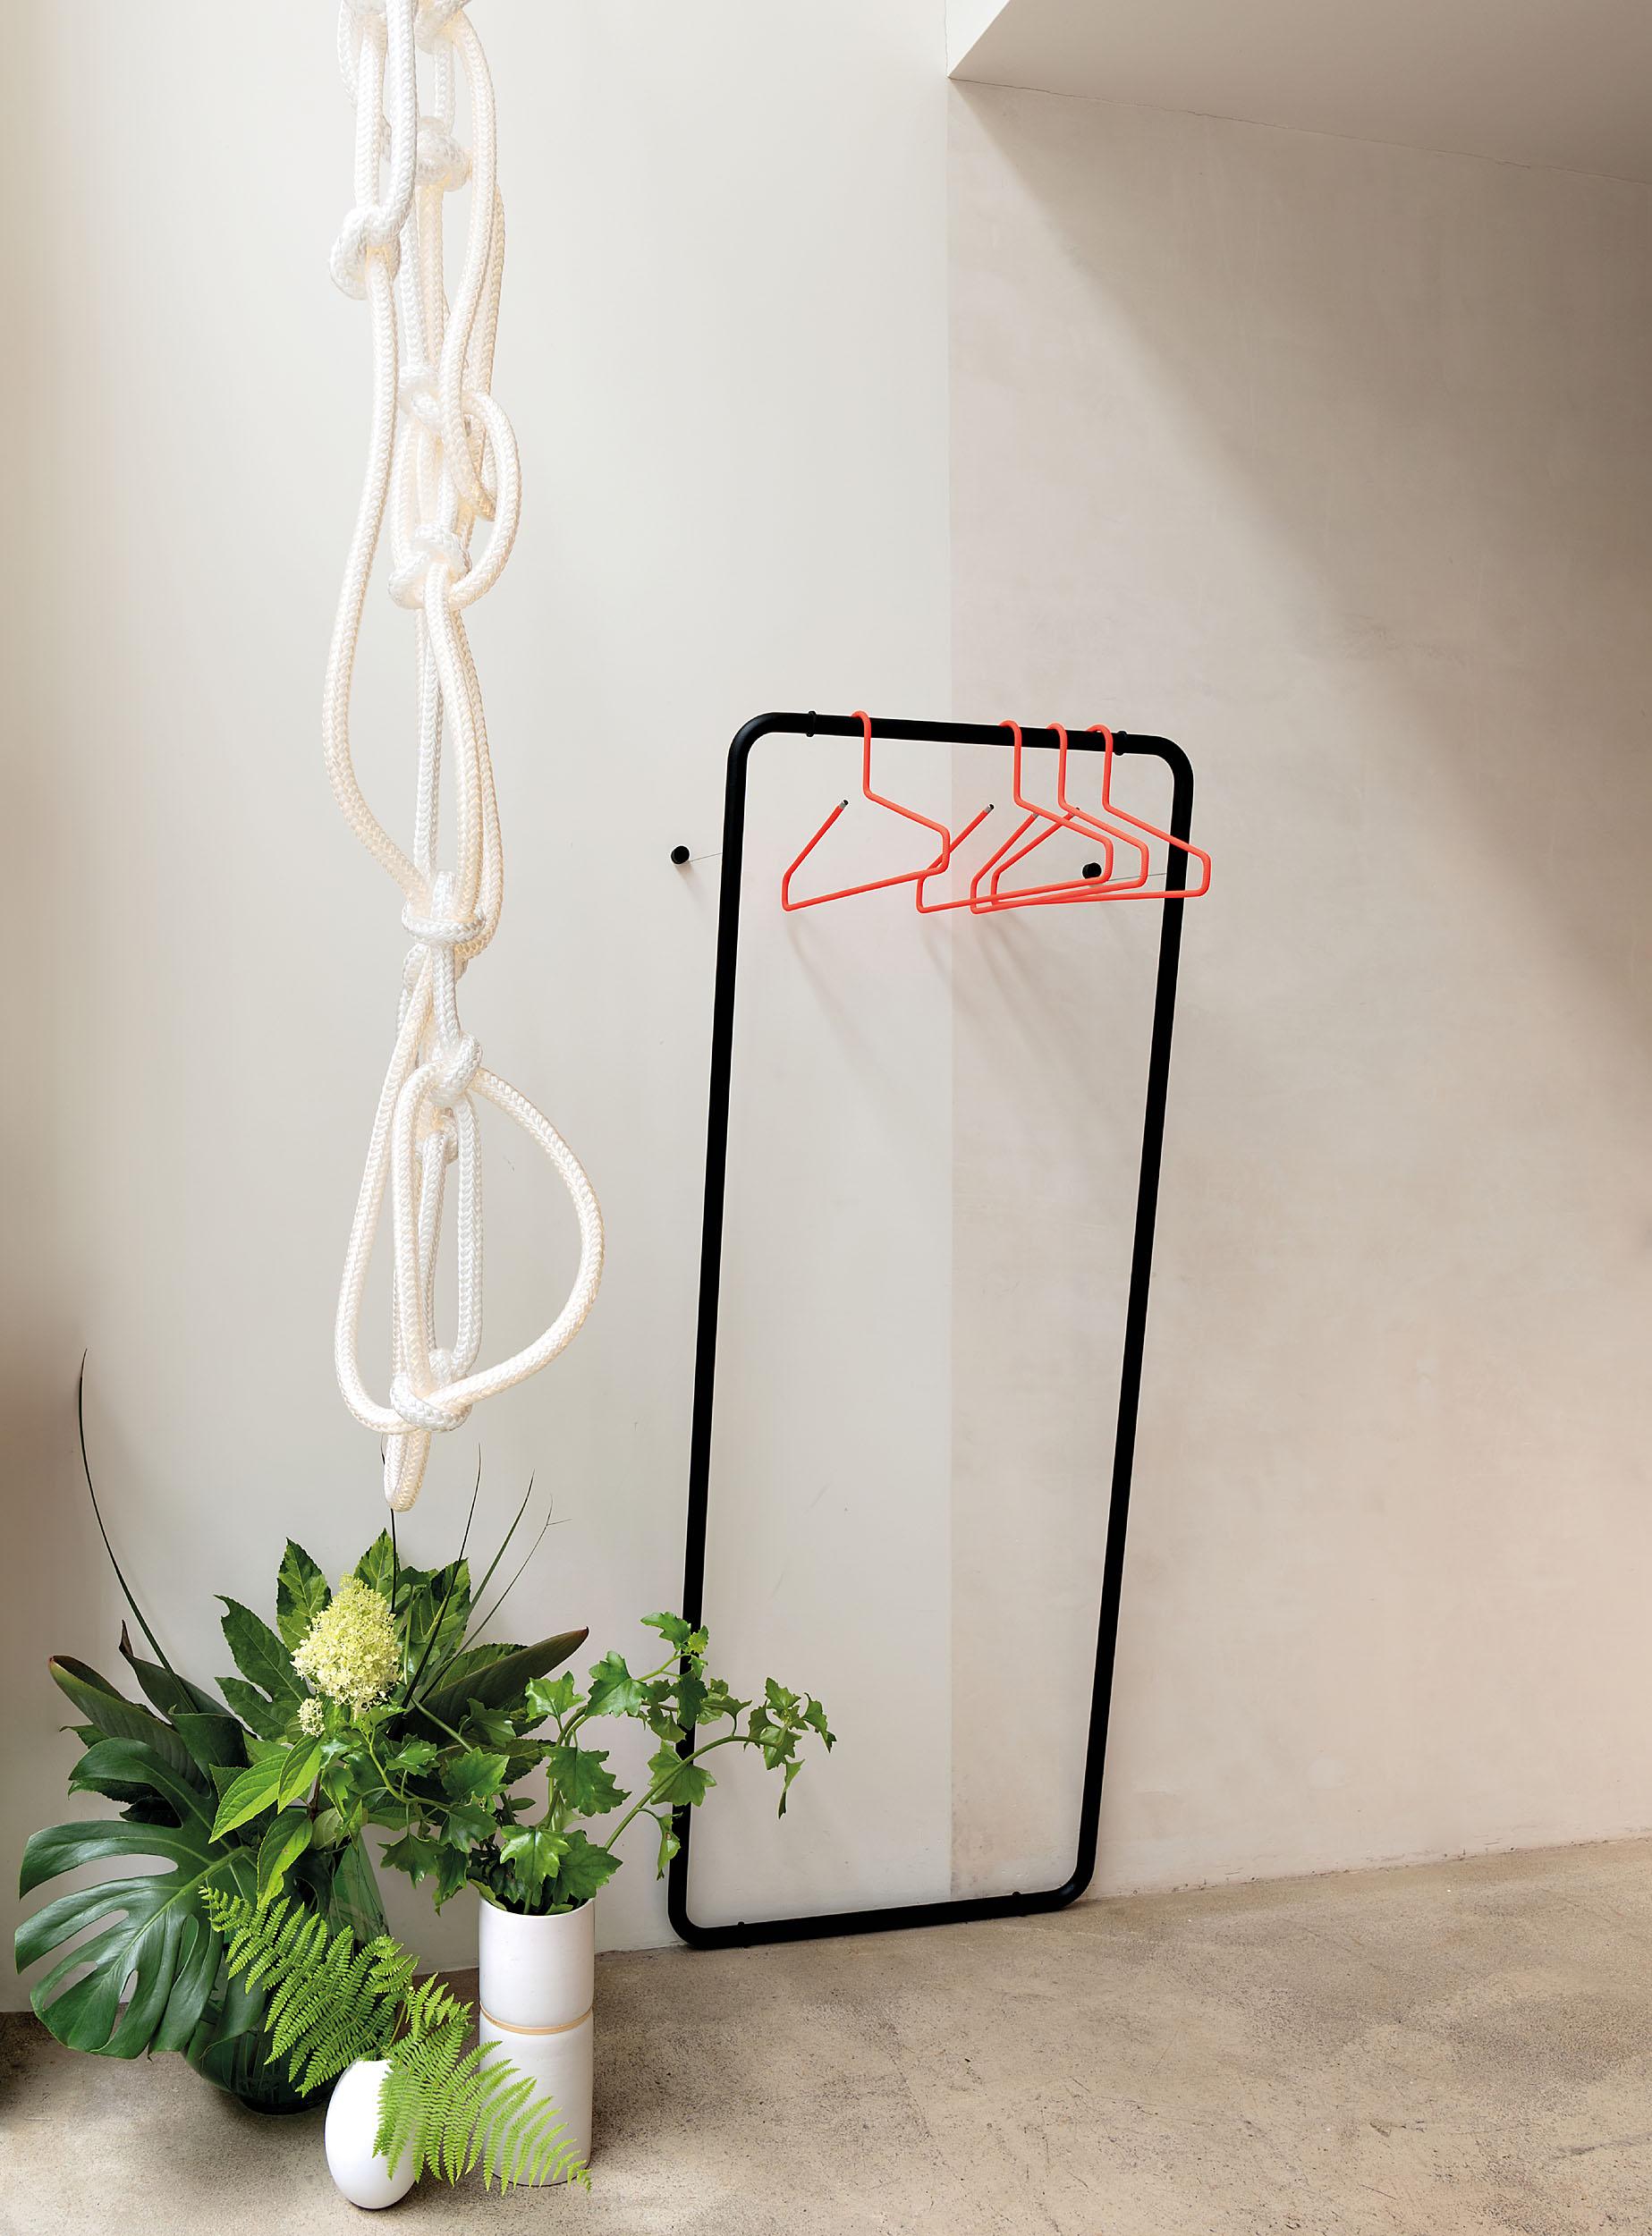 Hangers not included.
Wall-mounted coat rack (pull-down)
Made of steel with fine powder-coated finish, 2 wire fixings on wall including magnet for fixing to wall.
Striking in its reserve. The curve coat rack combines impressive functionality with